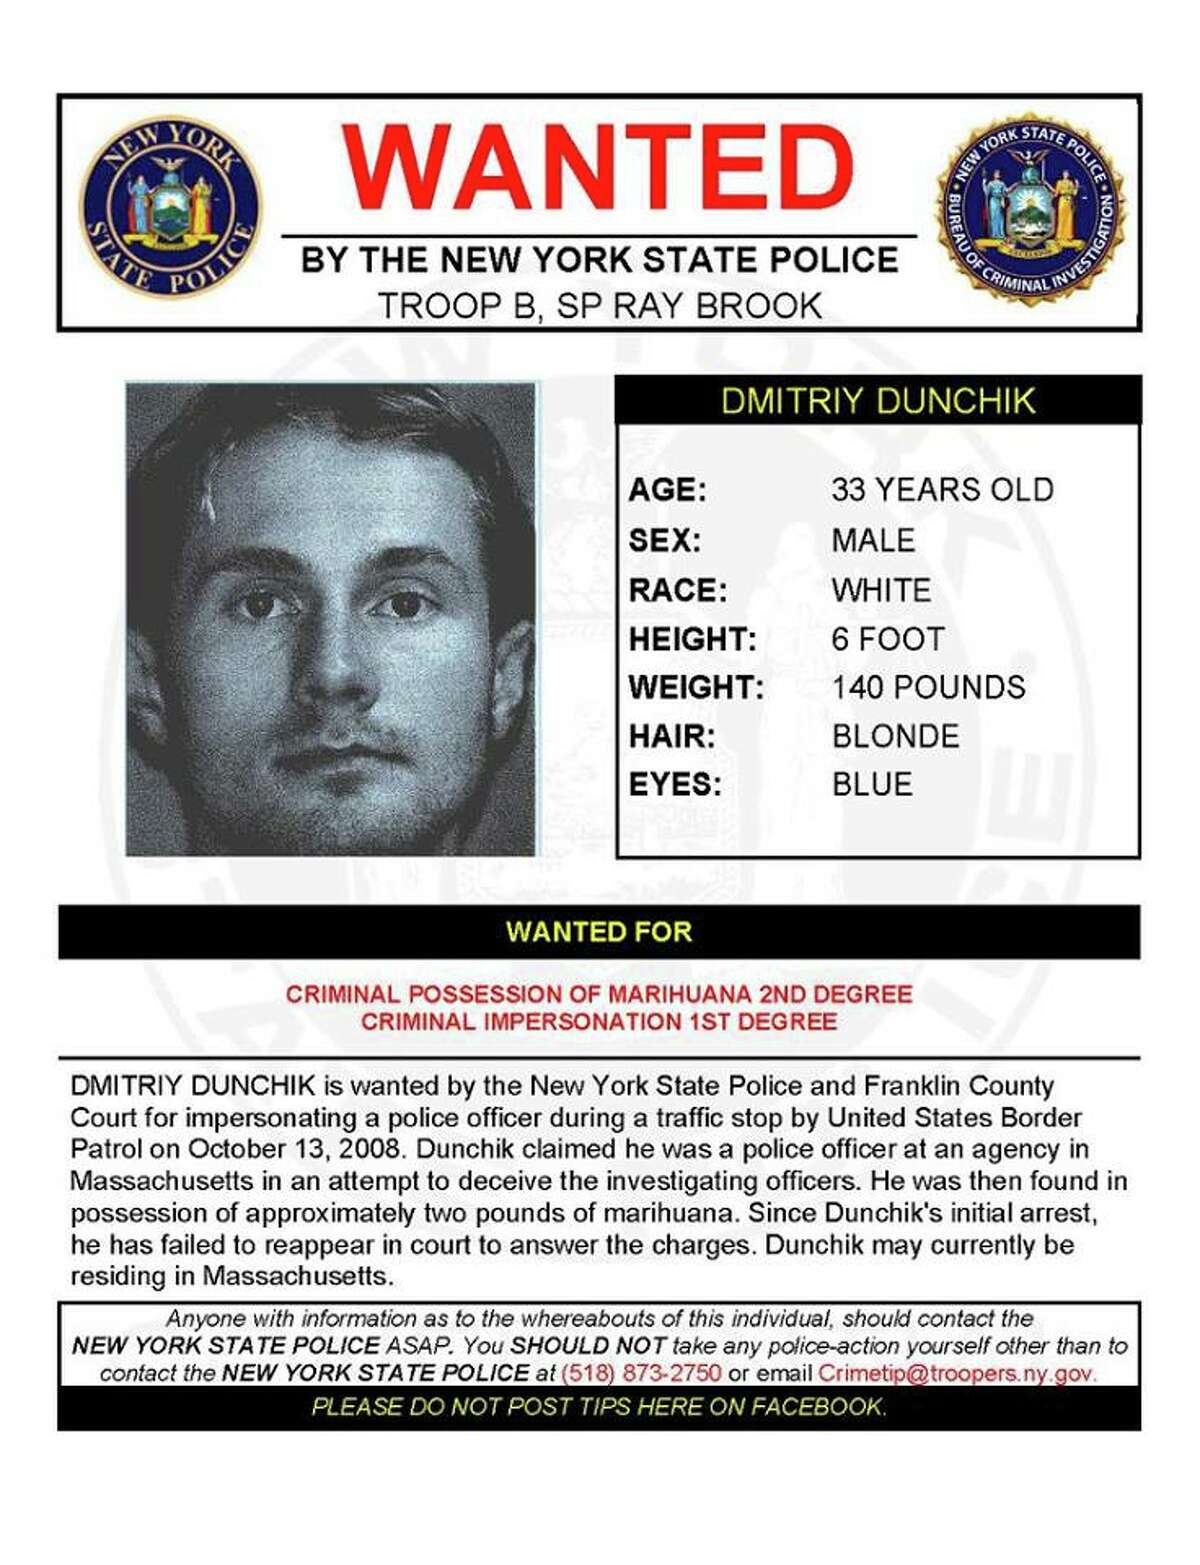 Dmitriy Dunchik, 33, is wanted by State Police and Franklin County Court for impersonating a police officer during a traffic stop by U.S. Border Patrol on Oct. 13, 2008. Dunchik claimed he was a police officer at an agency in Massachusetts in an attempt to deceive the investigating officers. He was then found in possession of approximately two pounds of marijuana. Since Dunchik's initial arrest, he has failed to reappear in court to answer charges of criminal possession of marijuana and criminal impersonation. Dunchik may currently be living in Massachusetts.(State Police)